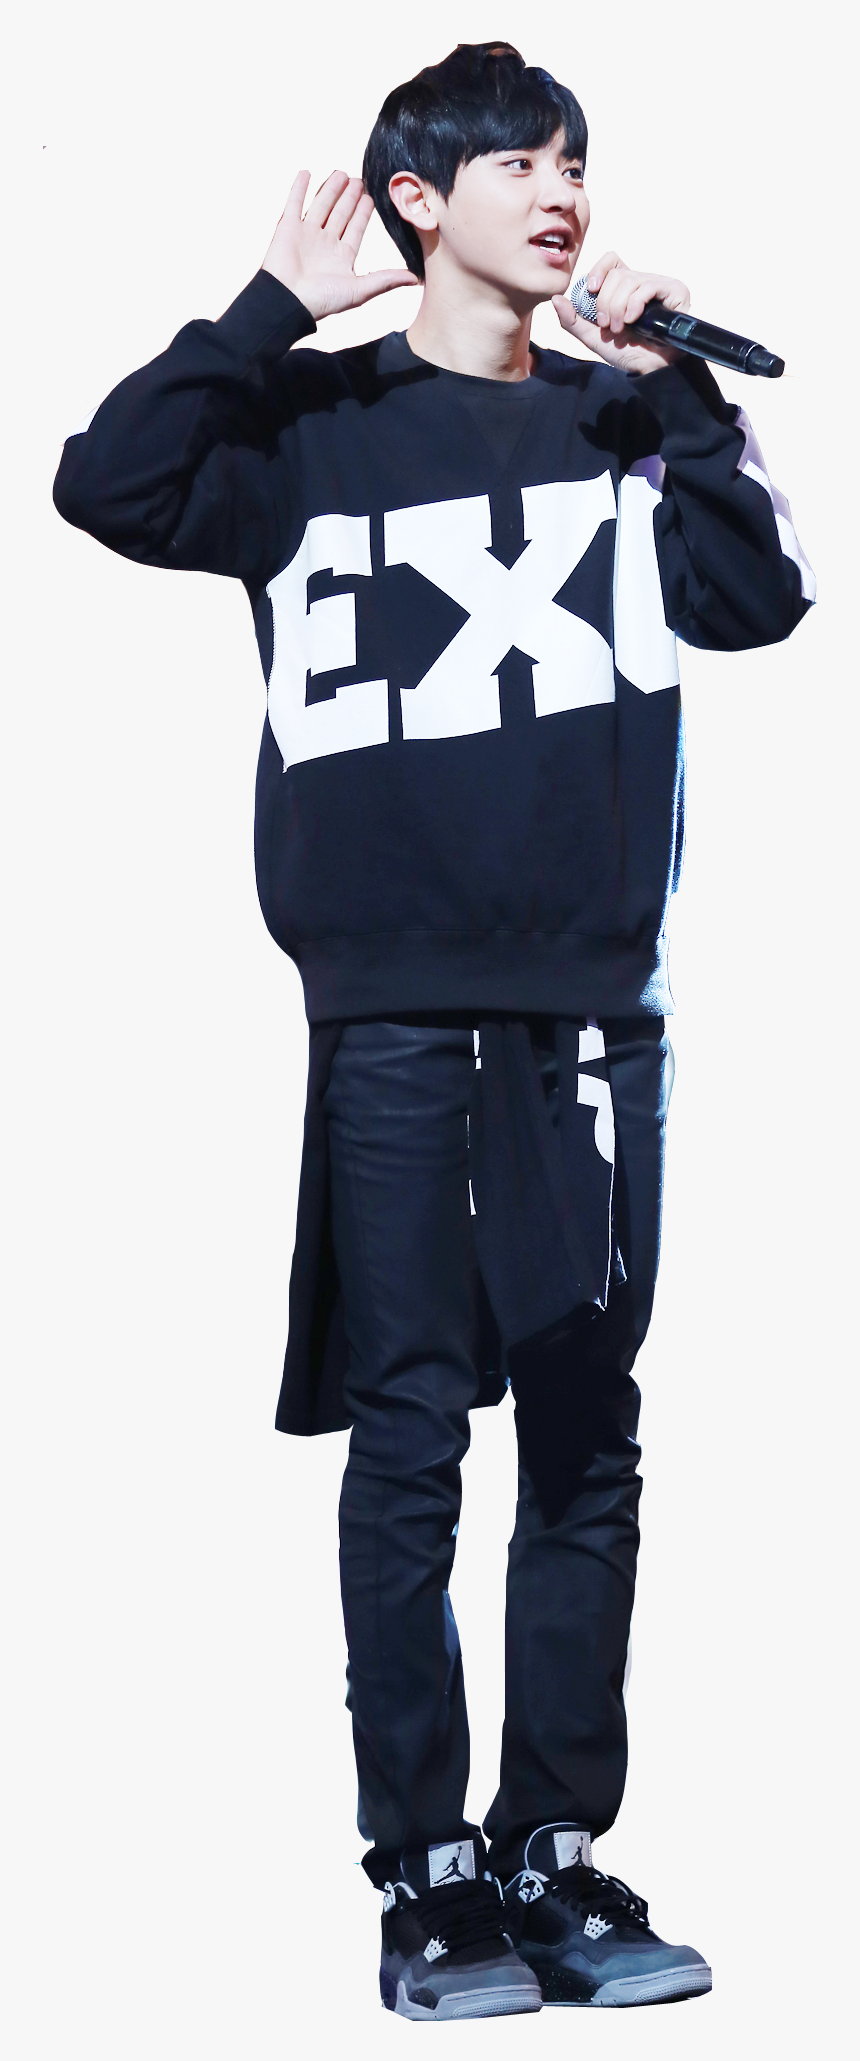 Thumb Image - Chanyeol Png Whole Body, Transparent Png, Free Download